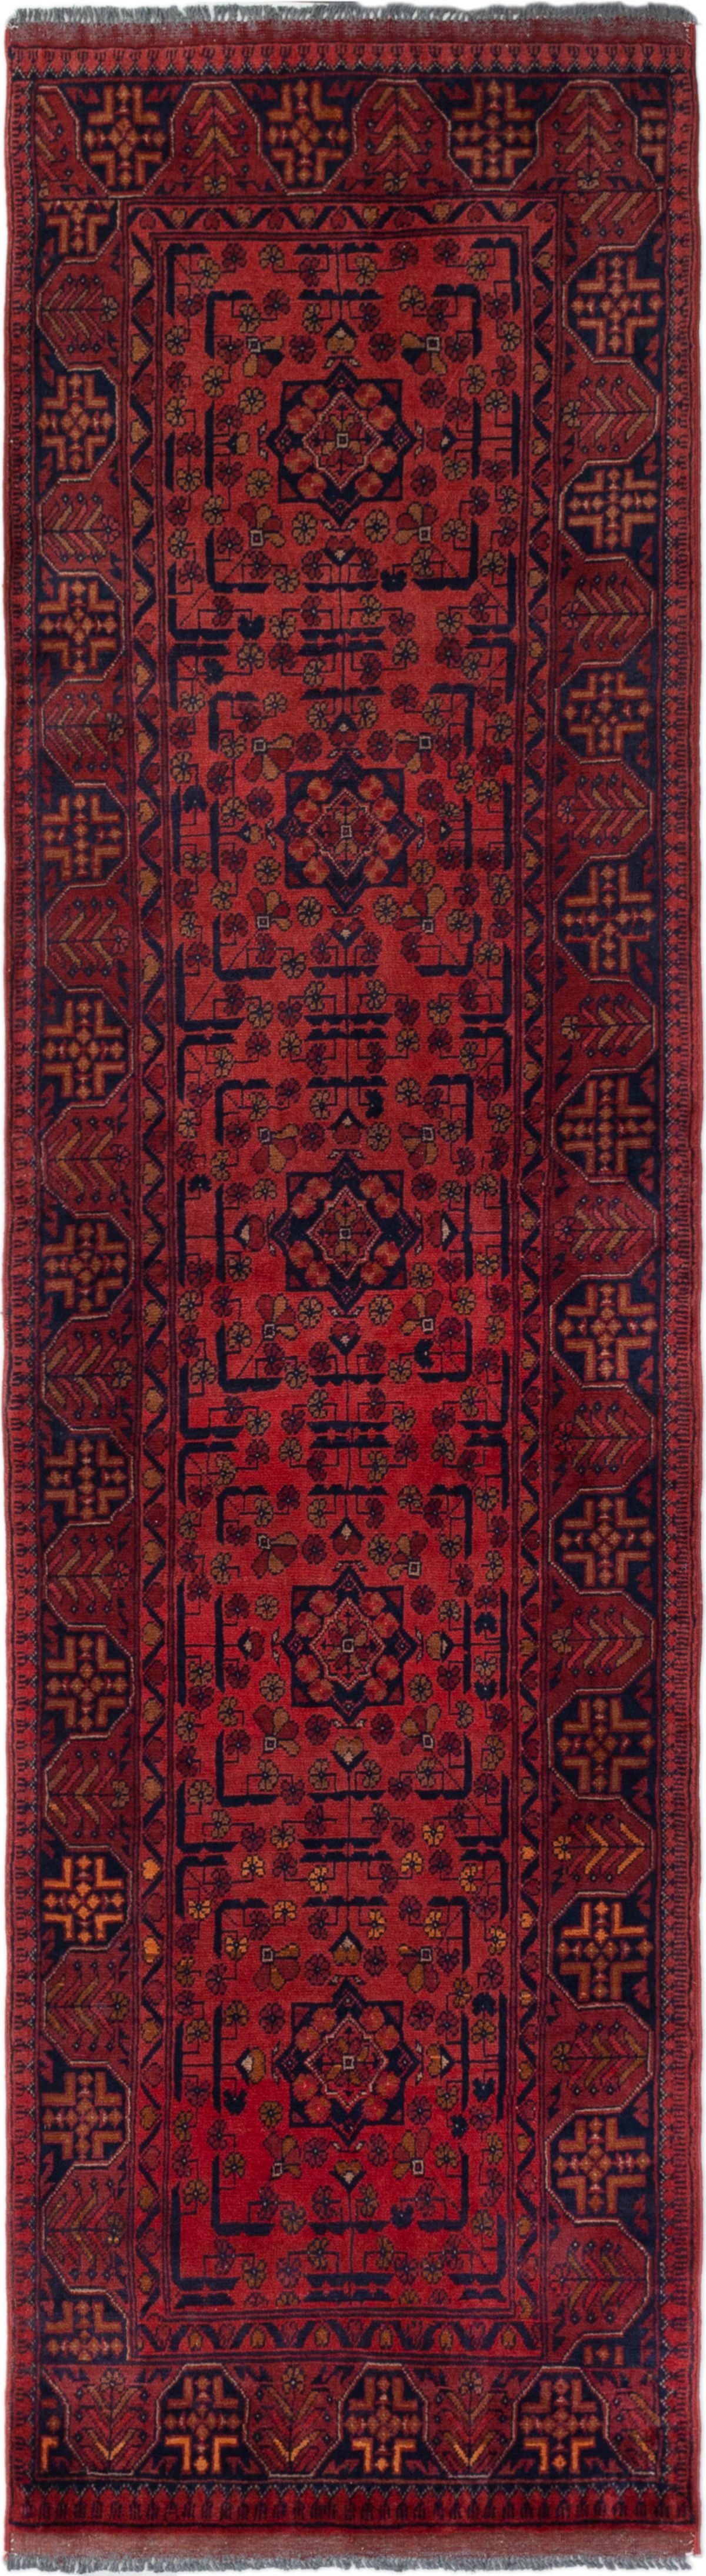 Hand-knotted Finest Khal Mohammadi Dark Copper Wool Rug 2'8" x 9'10"  Size: 2'8" x 9'10"  